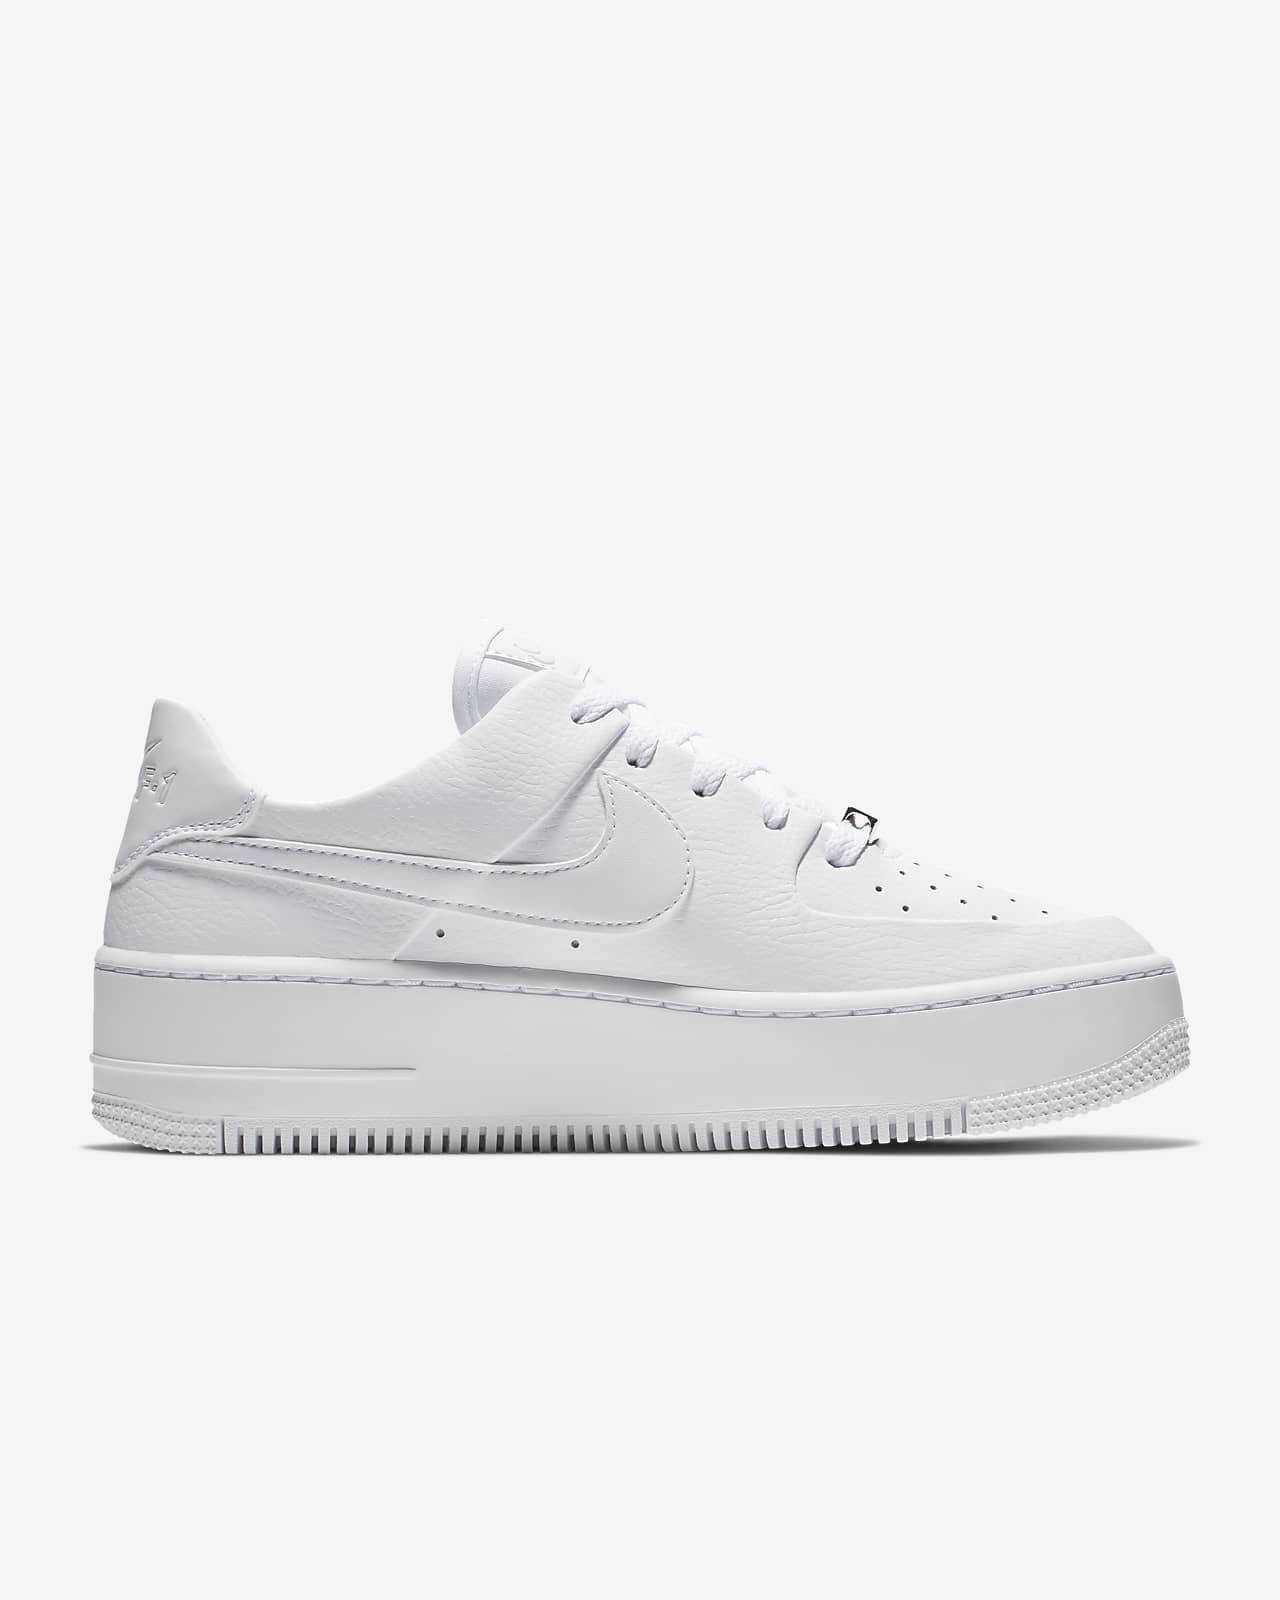 nike air force 1 low size 9.5